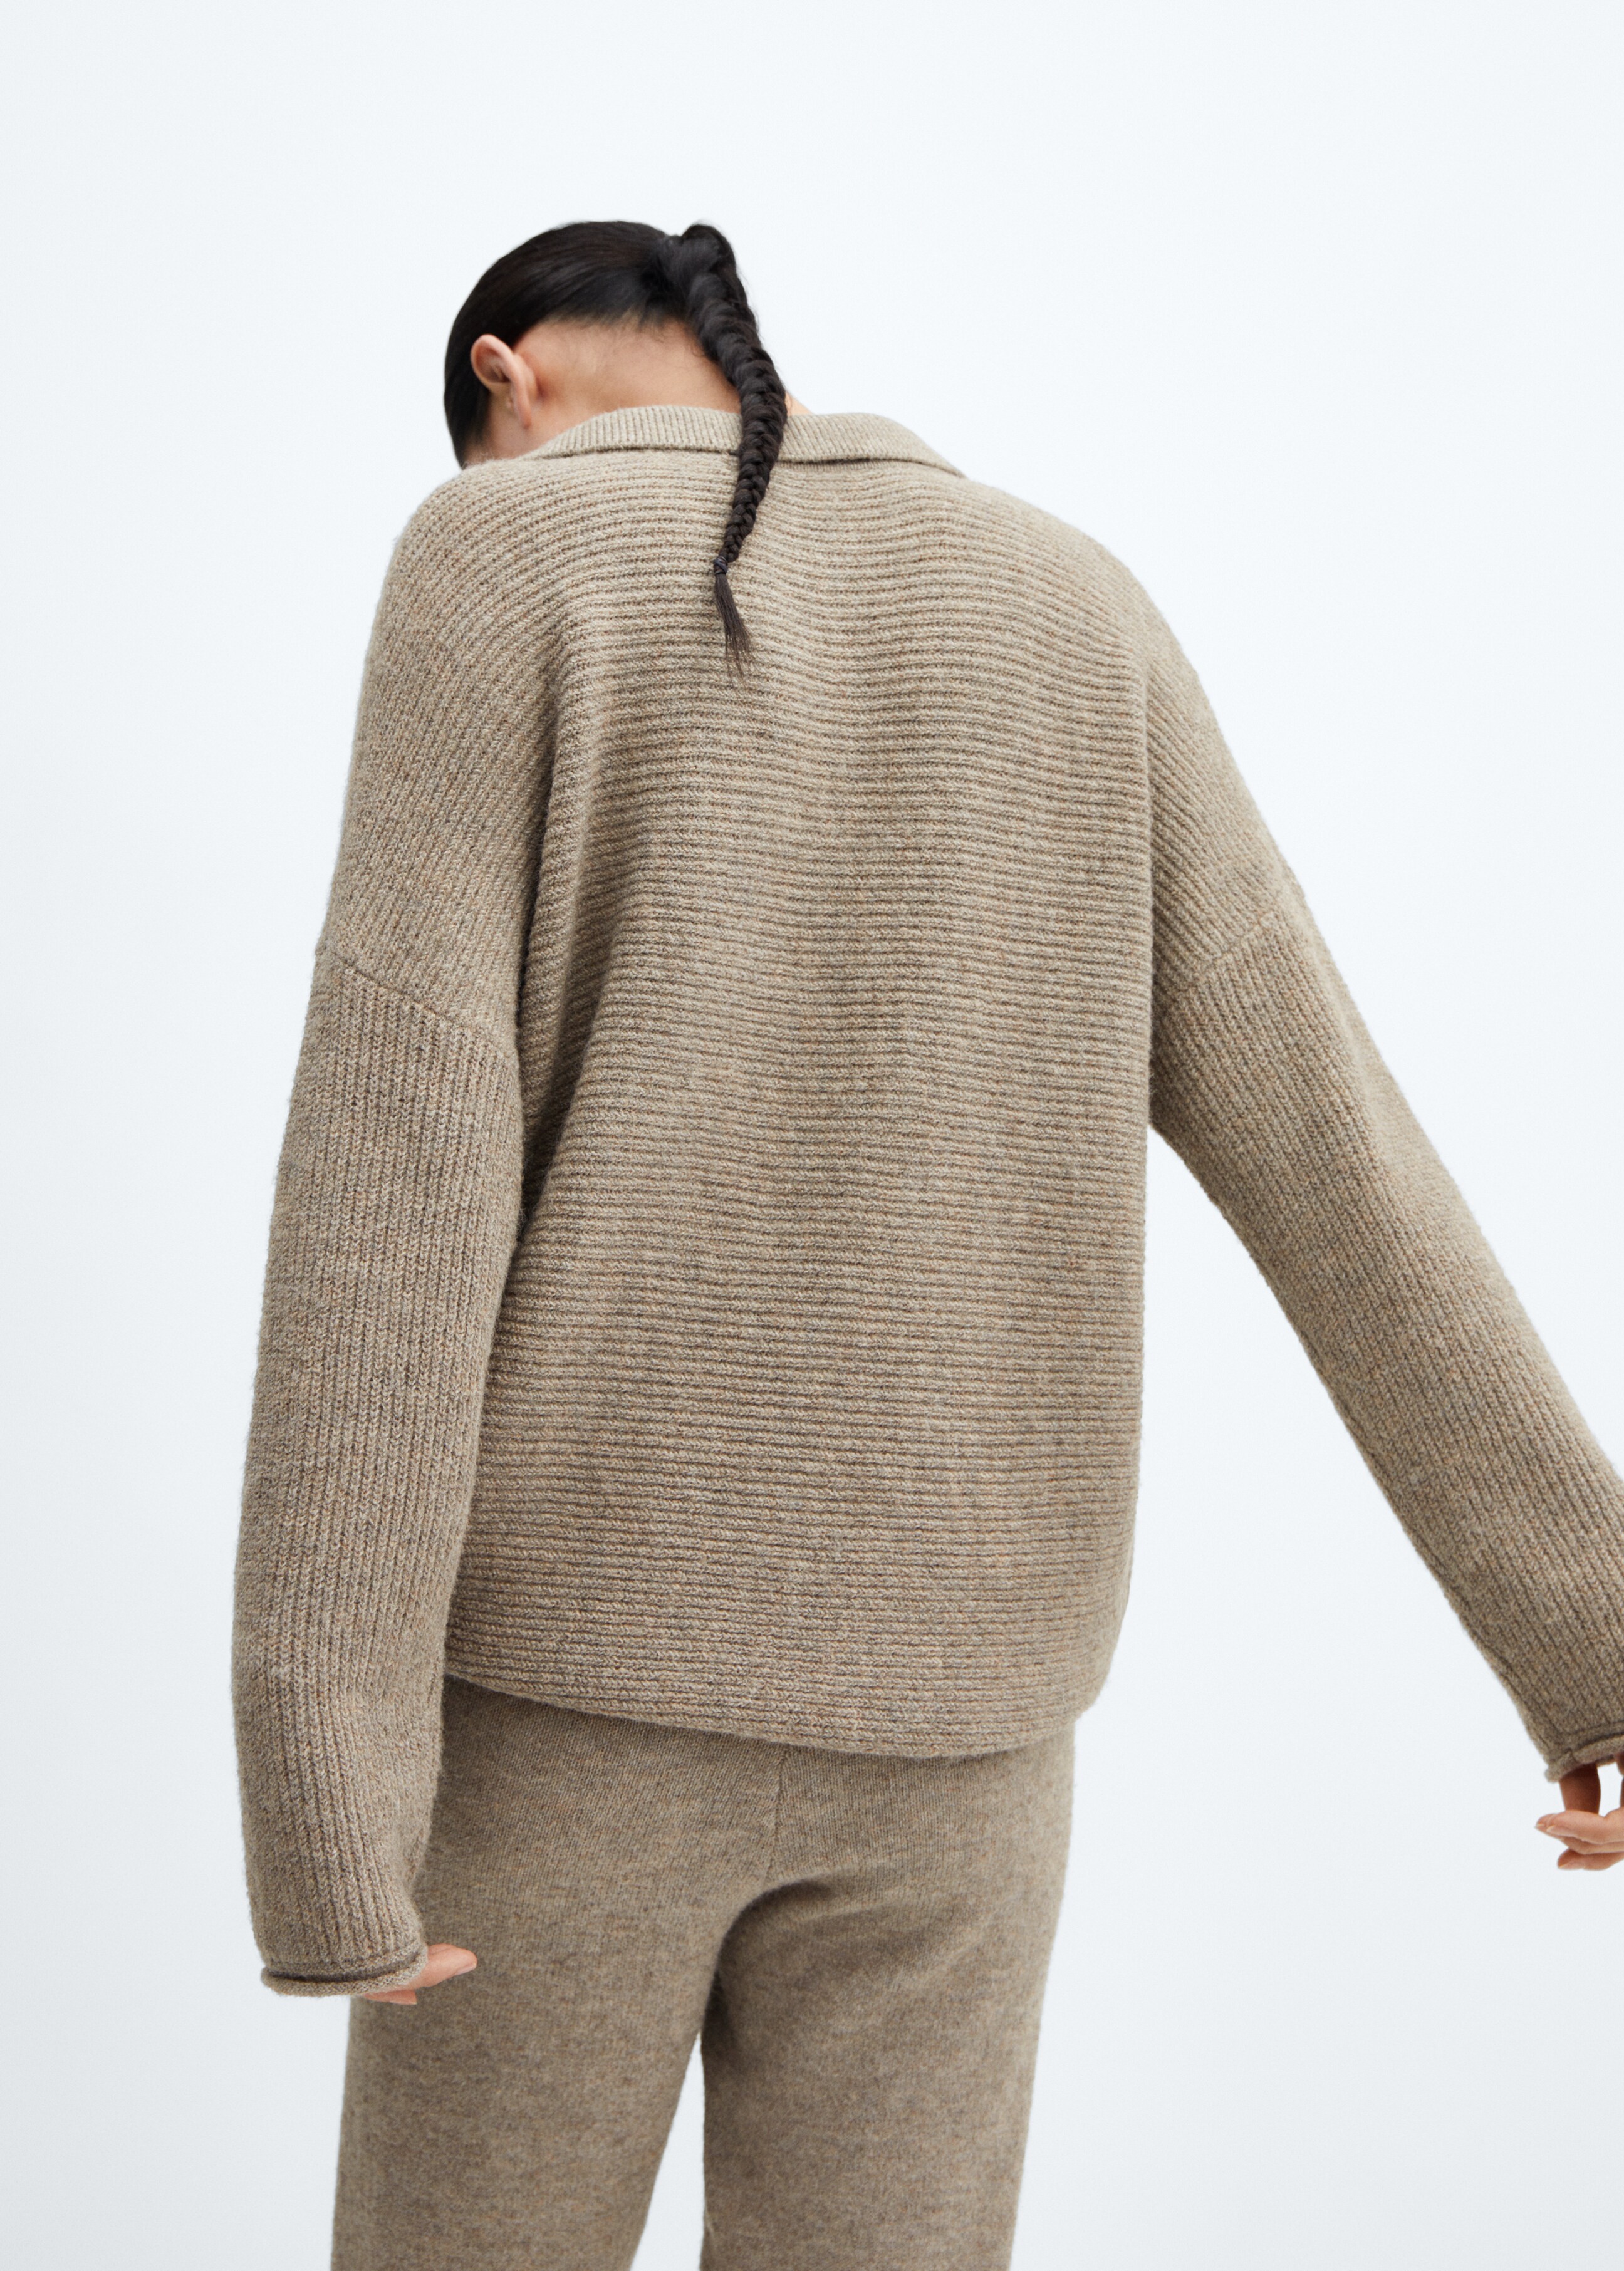 Oversized knit sweater - Reverse of the article